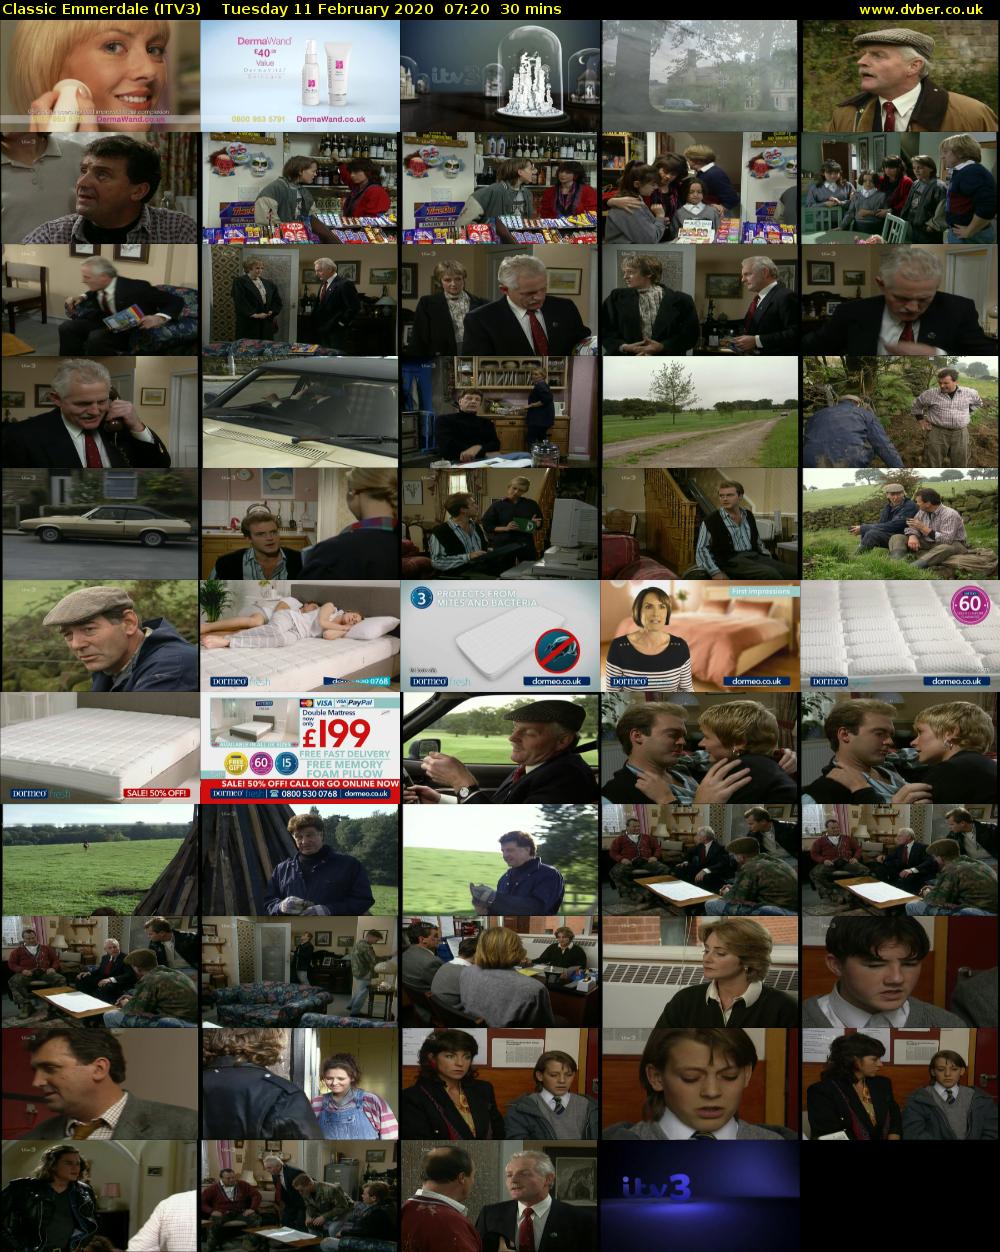 Classic Emmerdale (ITV3) Tuesday 11 February 2020 07:20 - 07:50